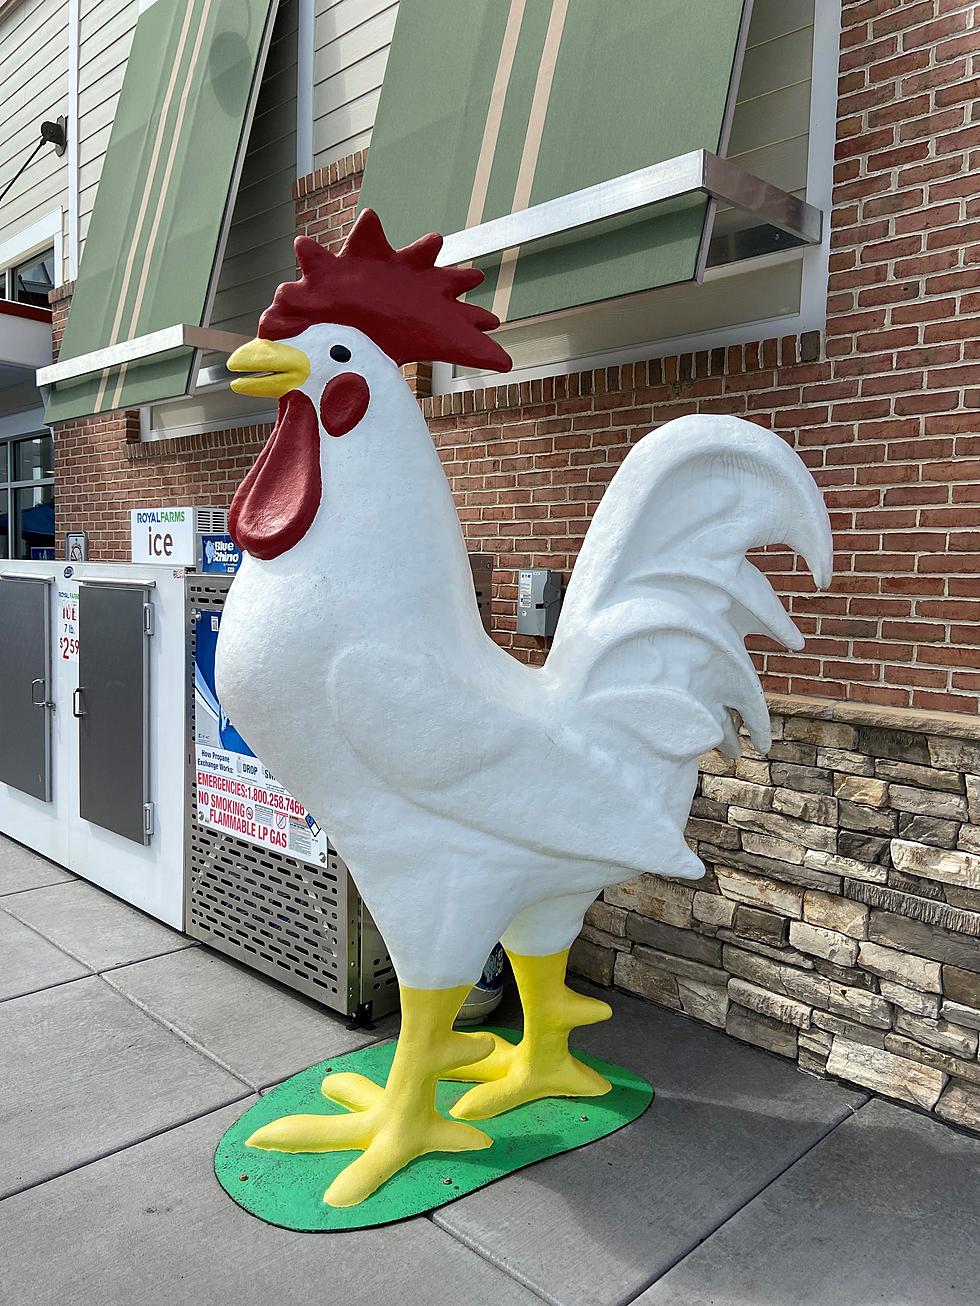 The Beautiful New Brick, NJ Royal Farms Hasn’t Opened. Here’s What’s Up